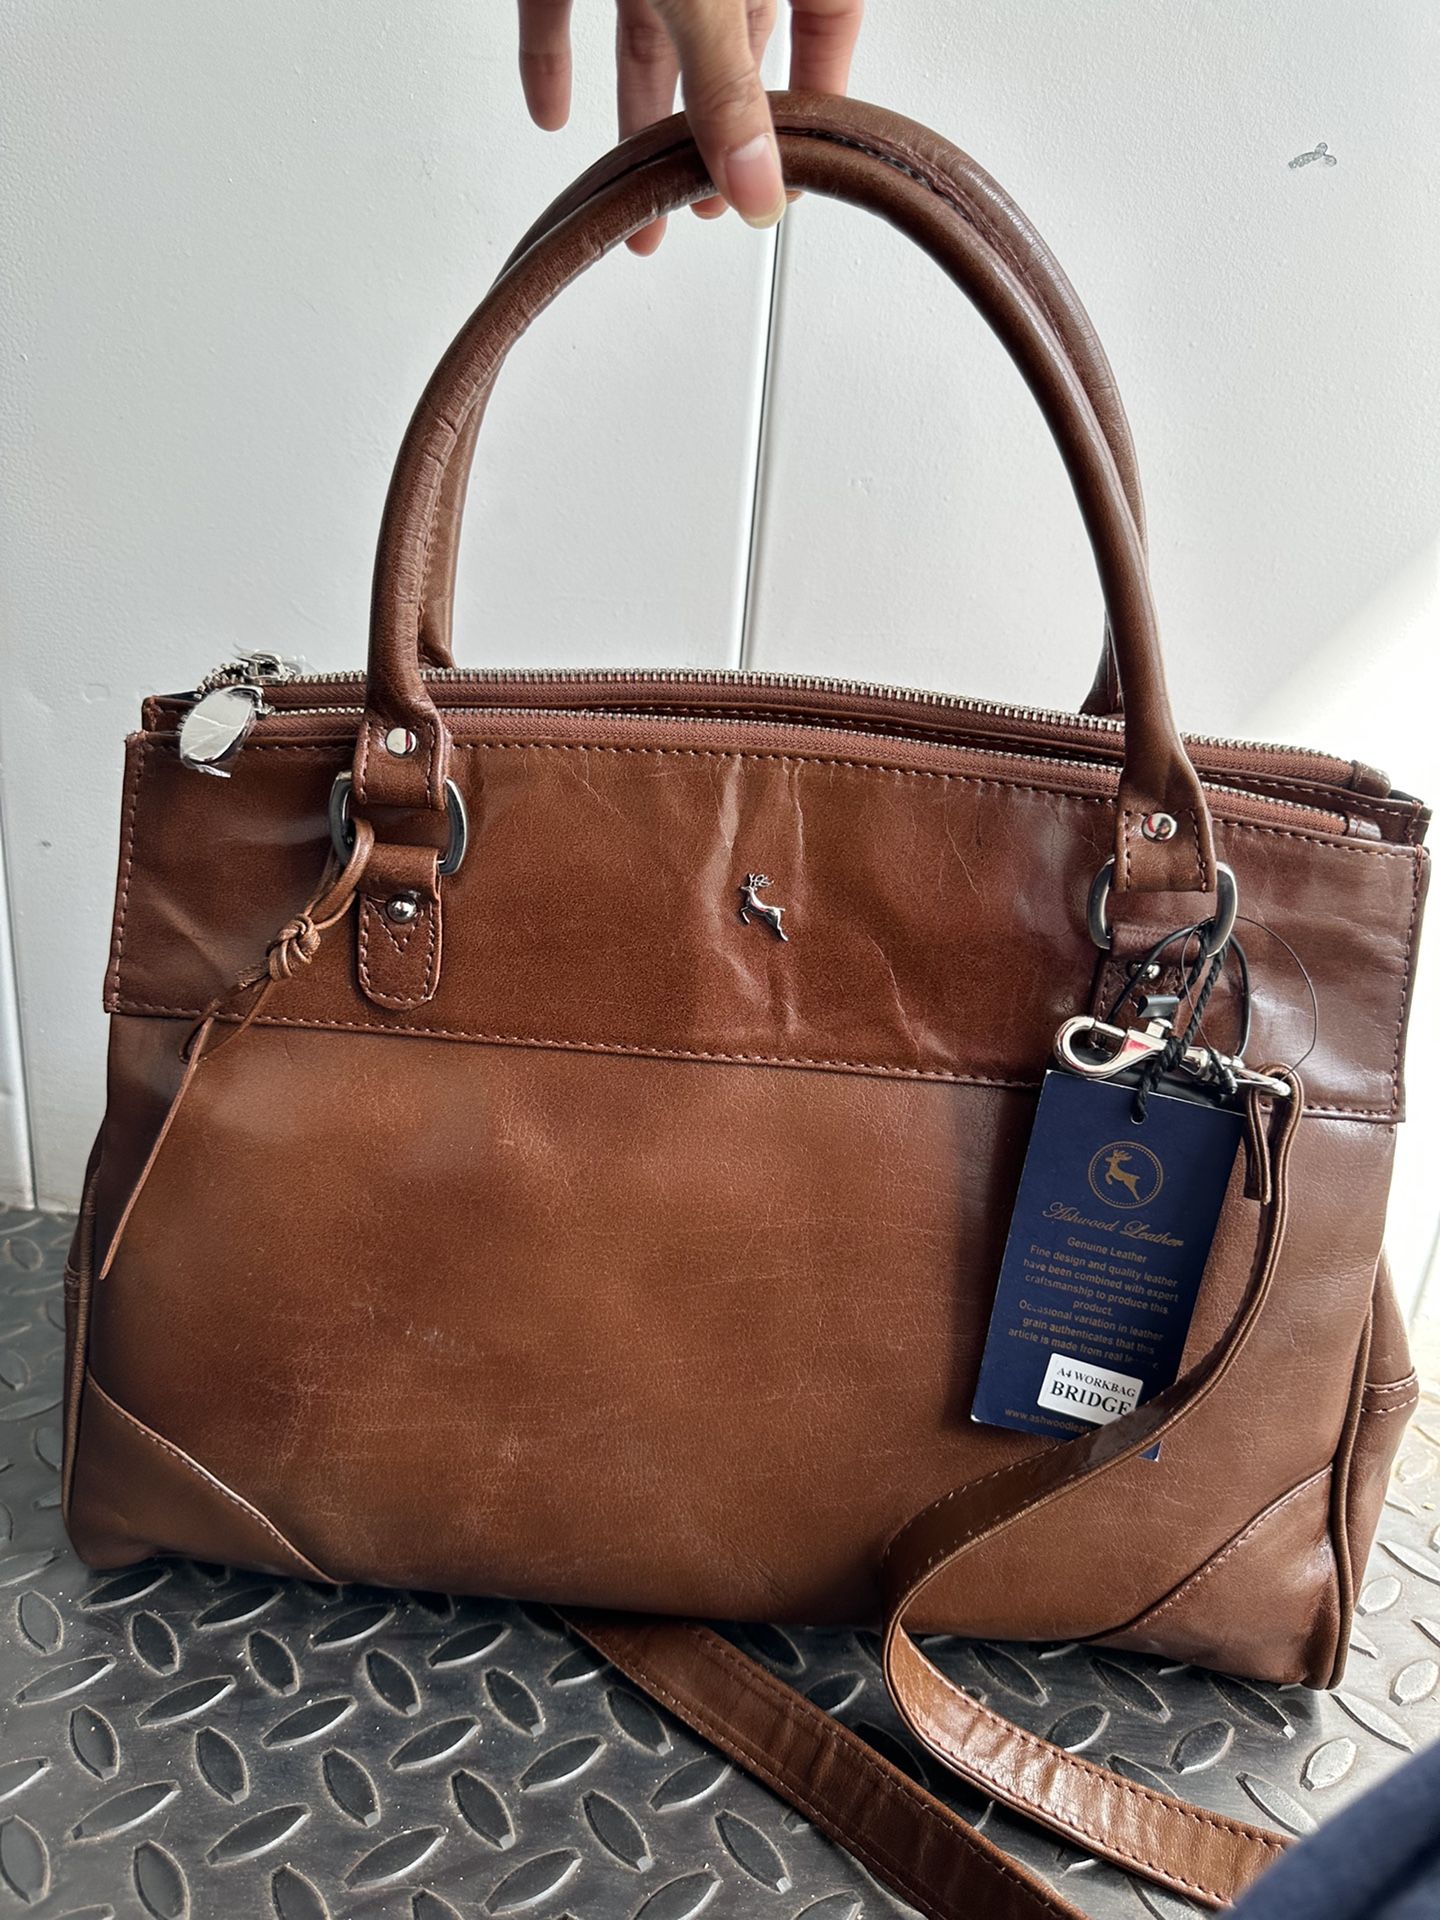 Ashwood Leather Duffle Bag for Sale in Los Angeles, CA - OfferUp